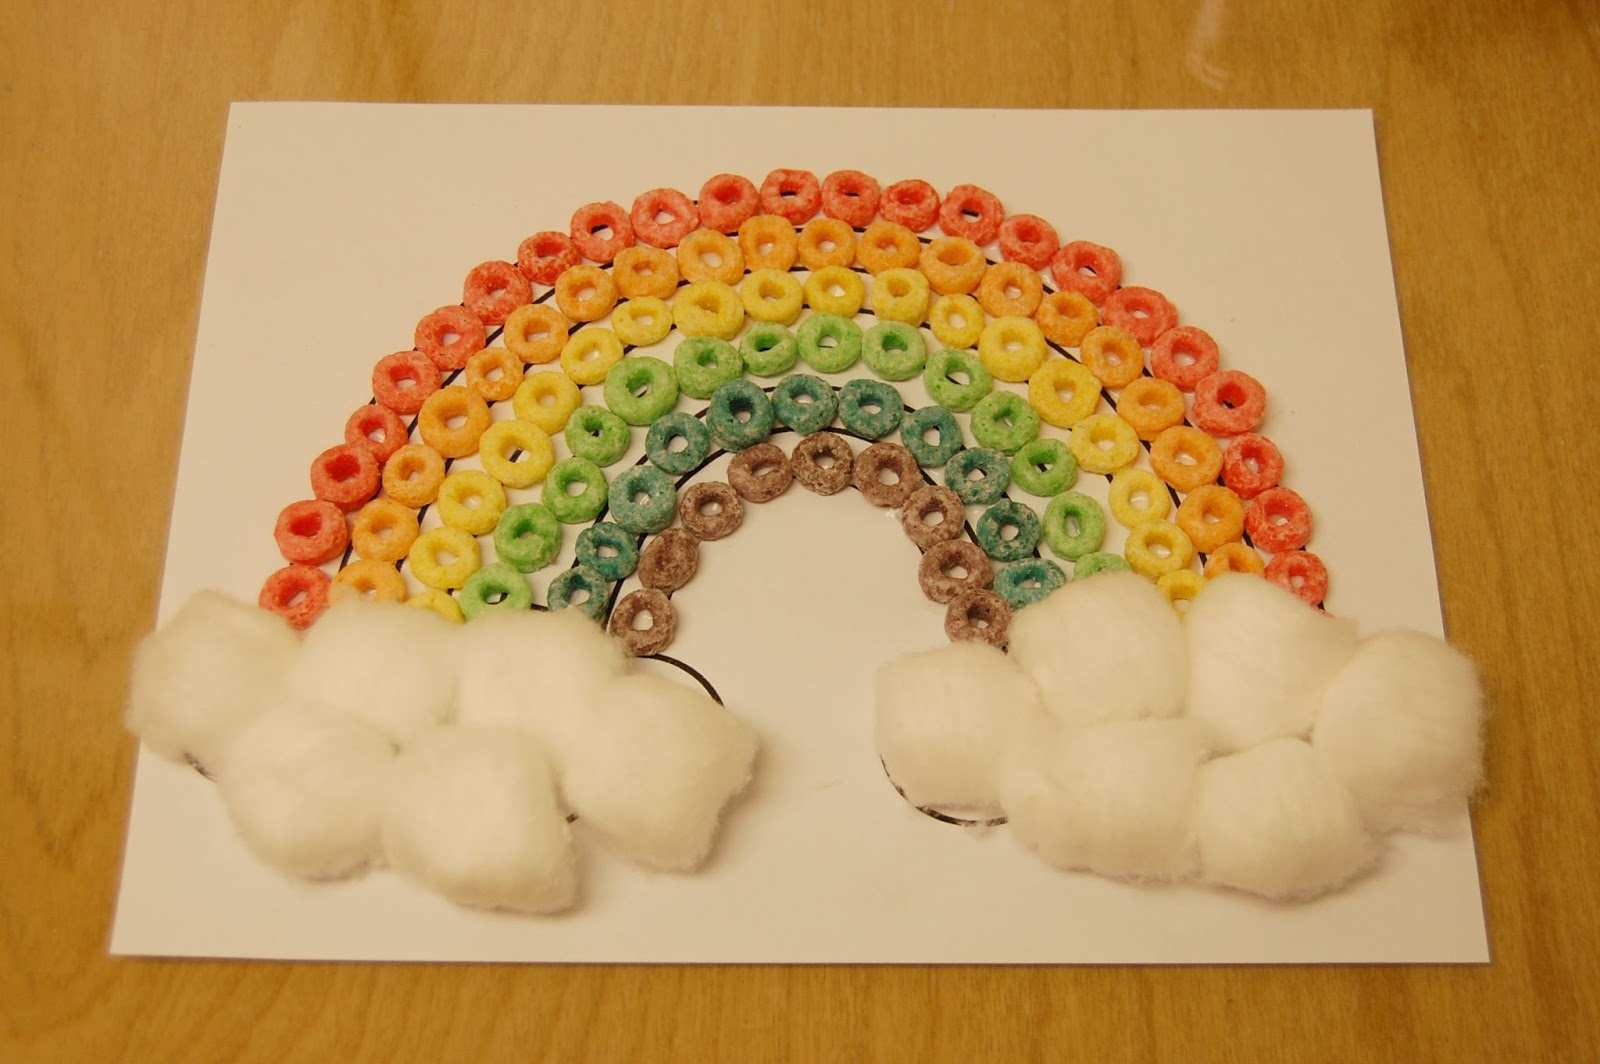 rainbow-template-for-fruit-loops